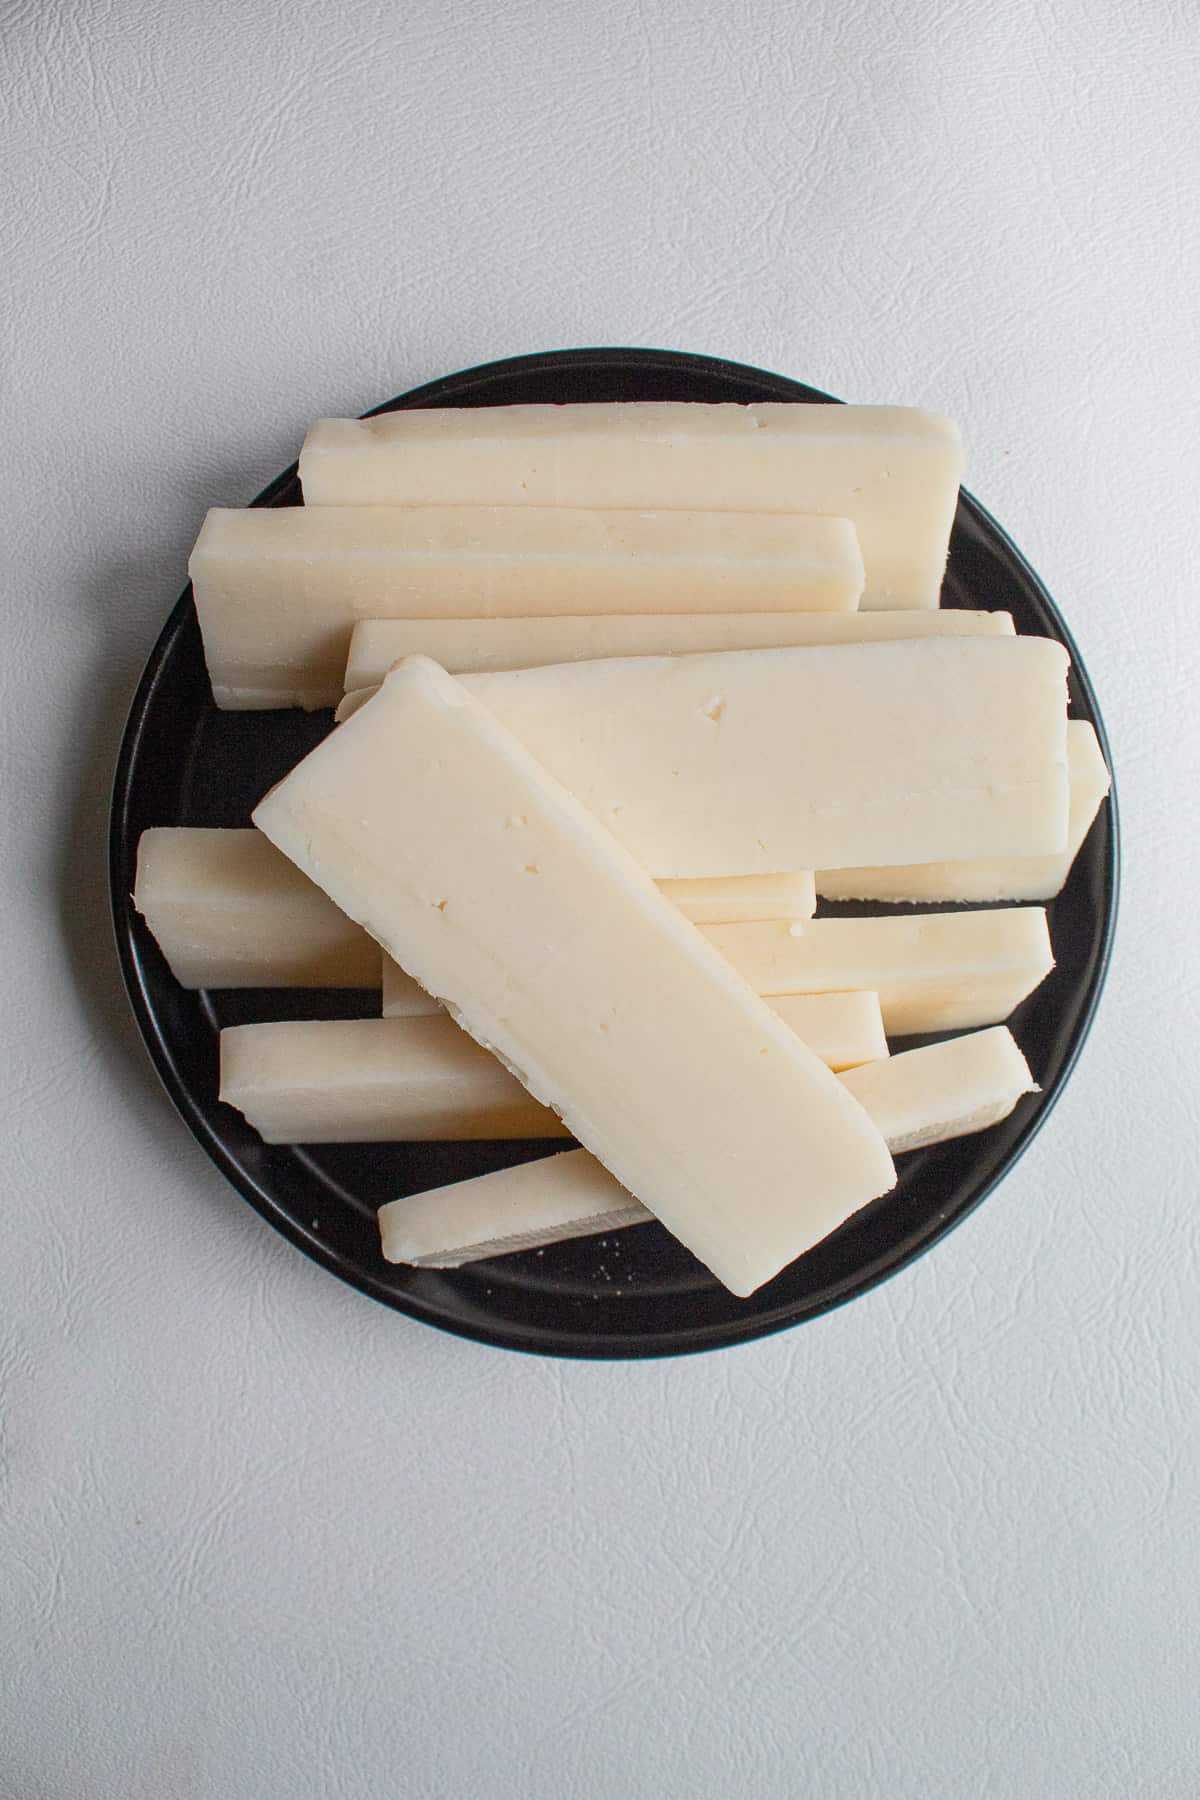 Slices of fresh halloumi cheese are piled on to a black plate.